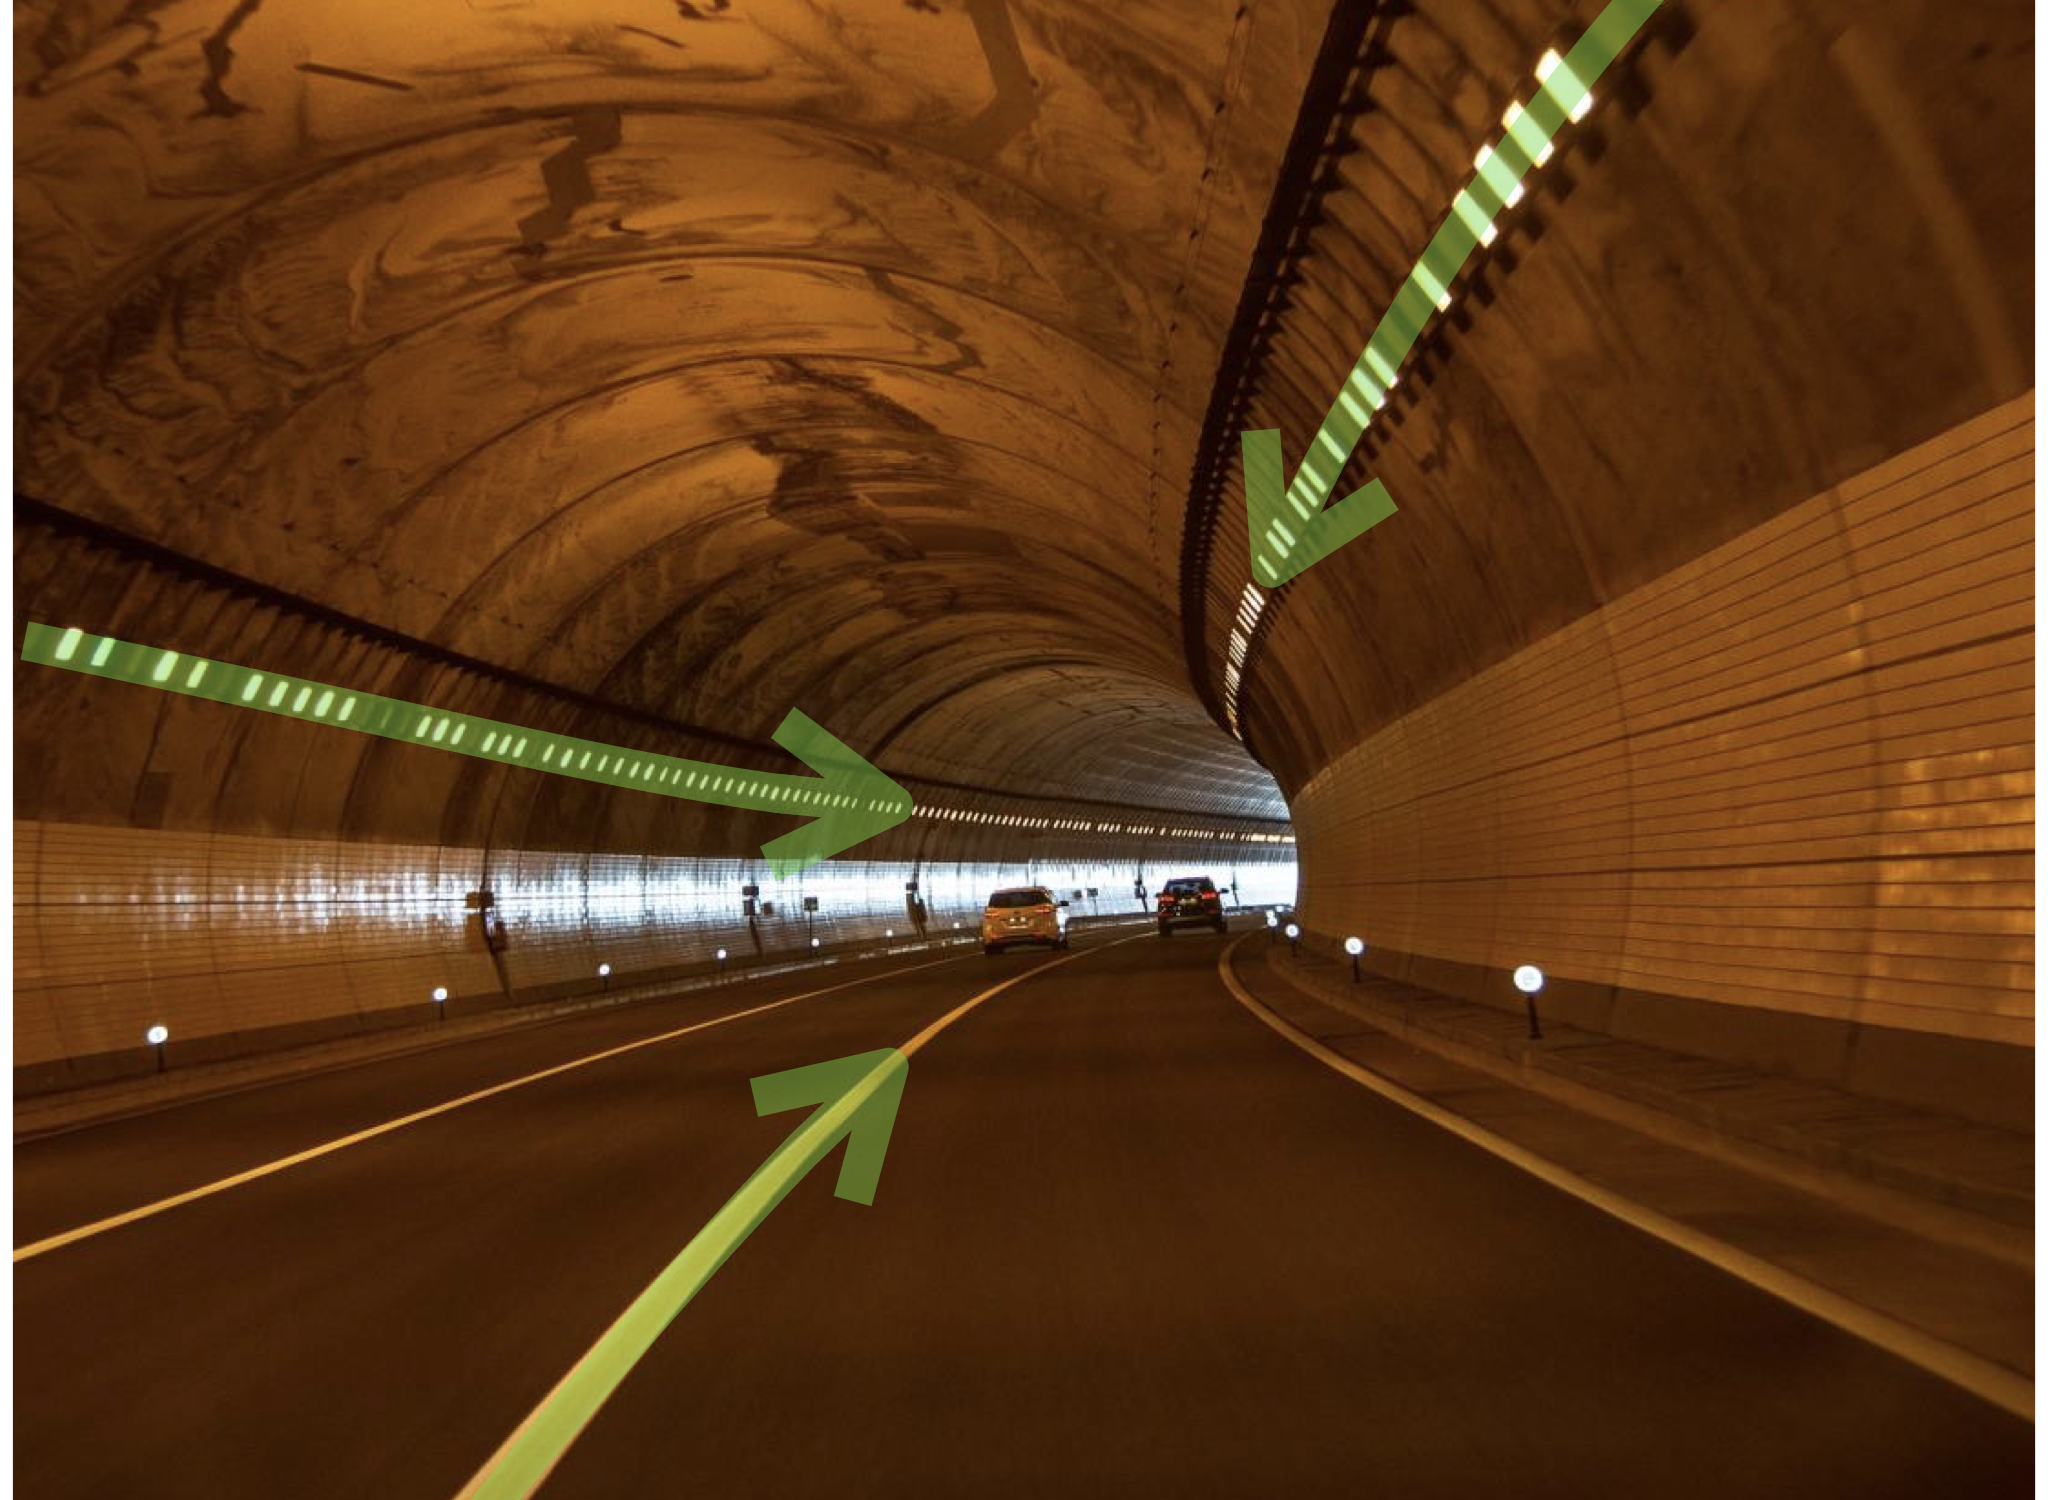 A curving road tunnel with lines